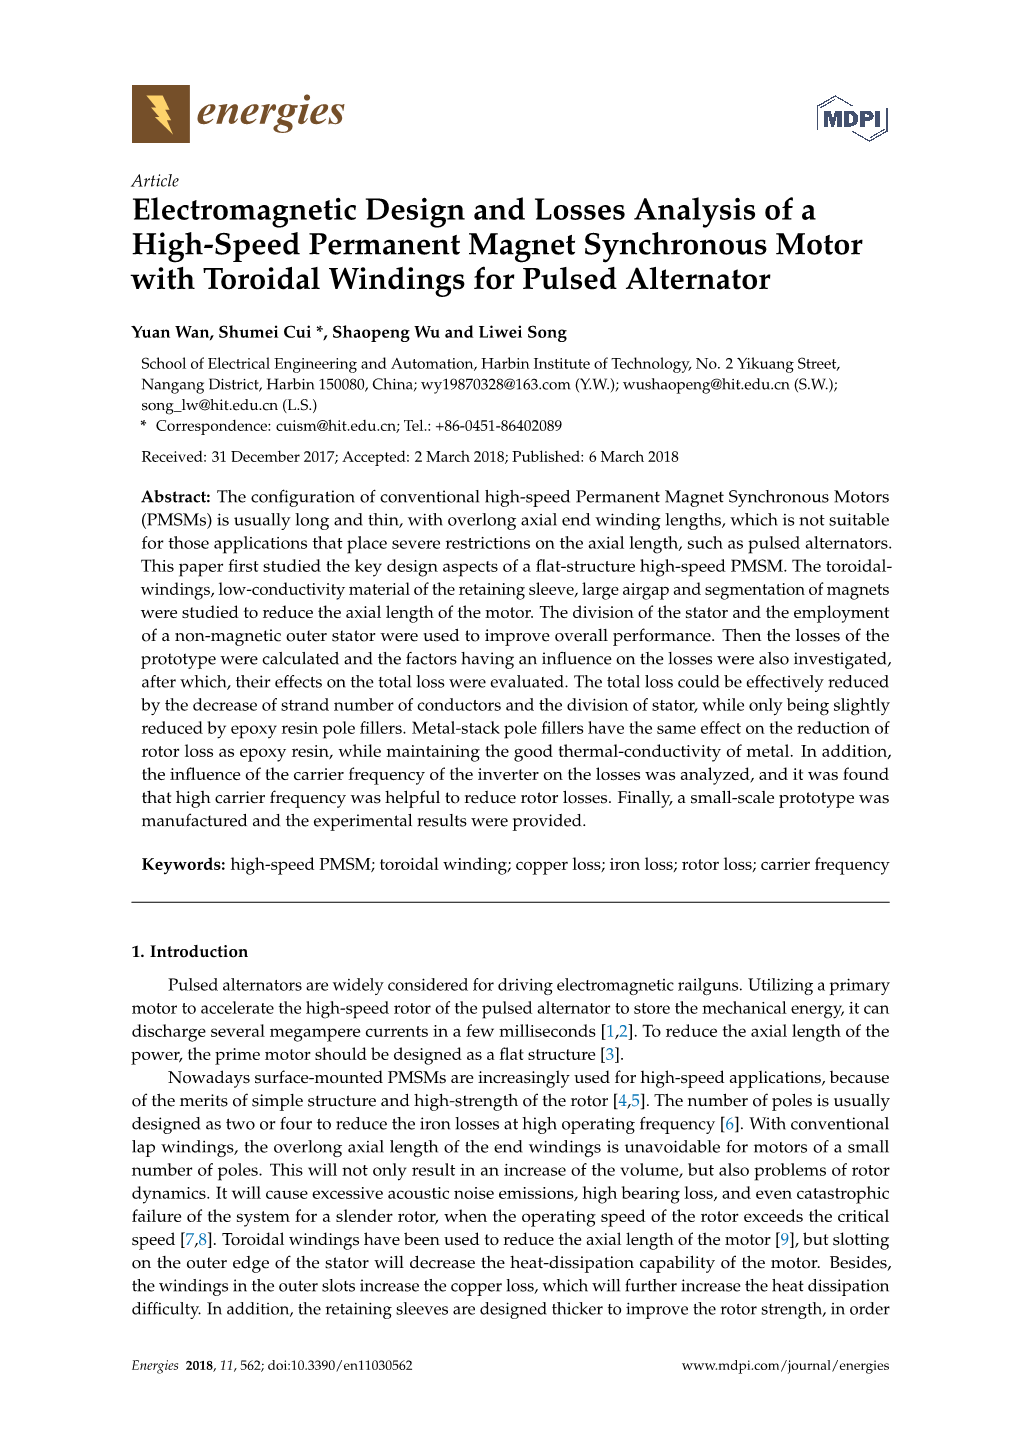 Electromagnetic Design and Losses Analysis of a High-Speed Permanent Magnet Synchronous Motor with Toroidal Windings for Pulsed Alternator